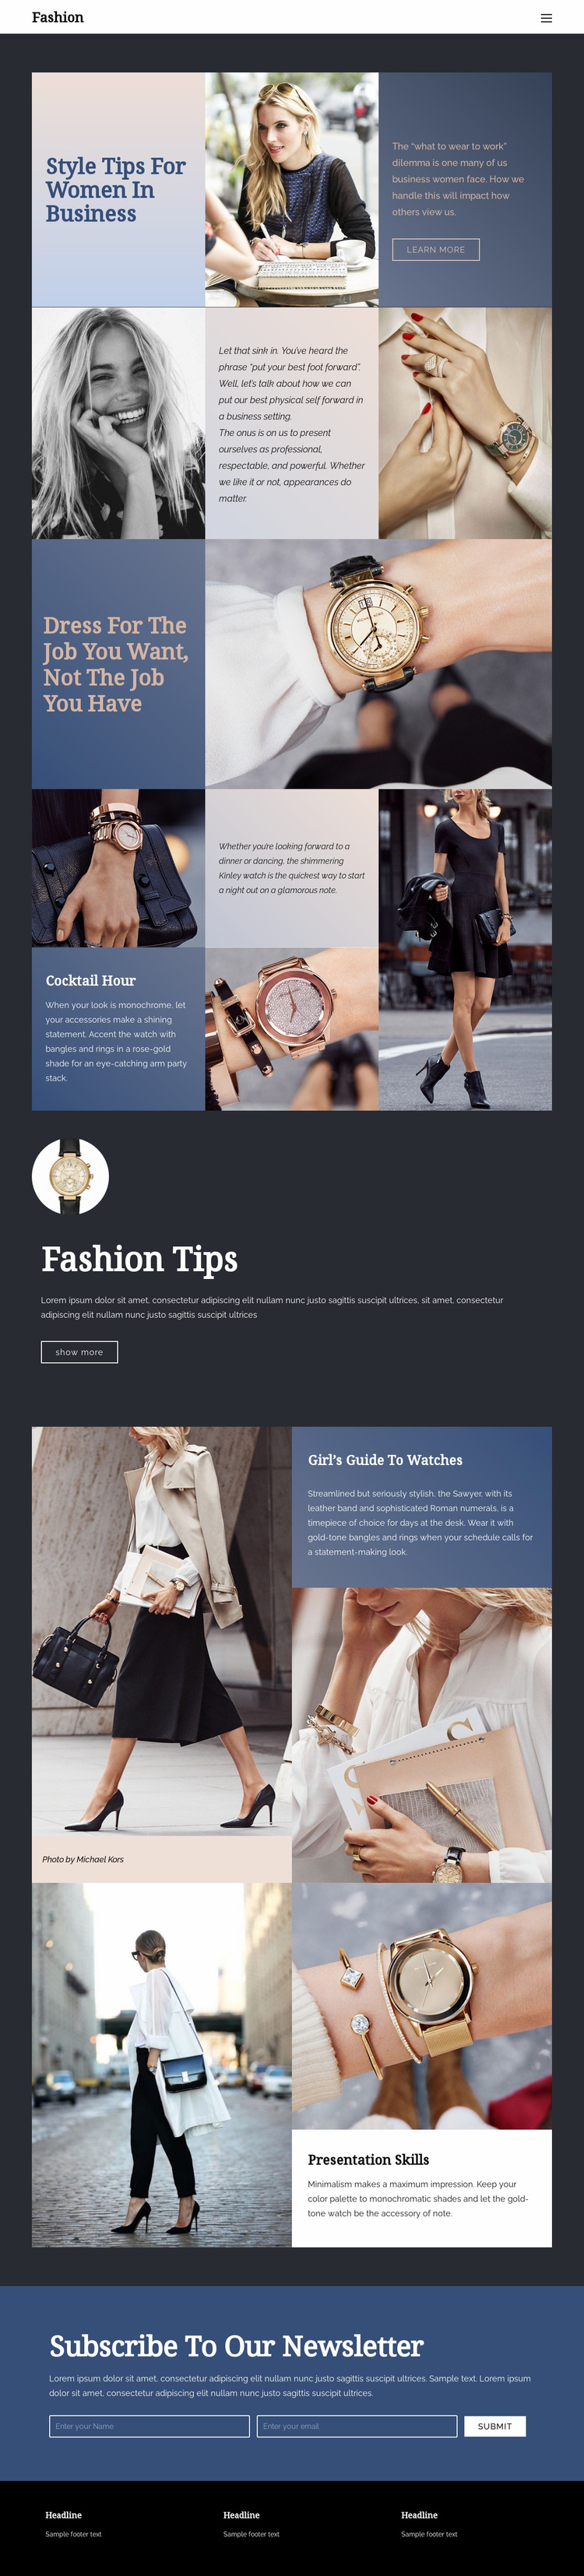 Tips to succeed in fashion Website Design